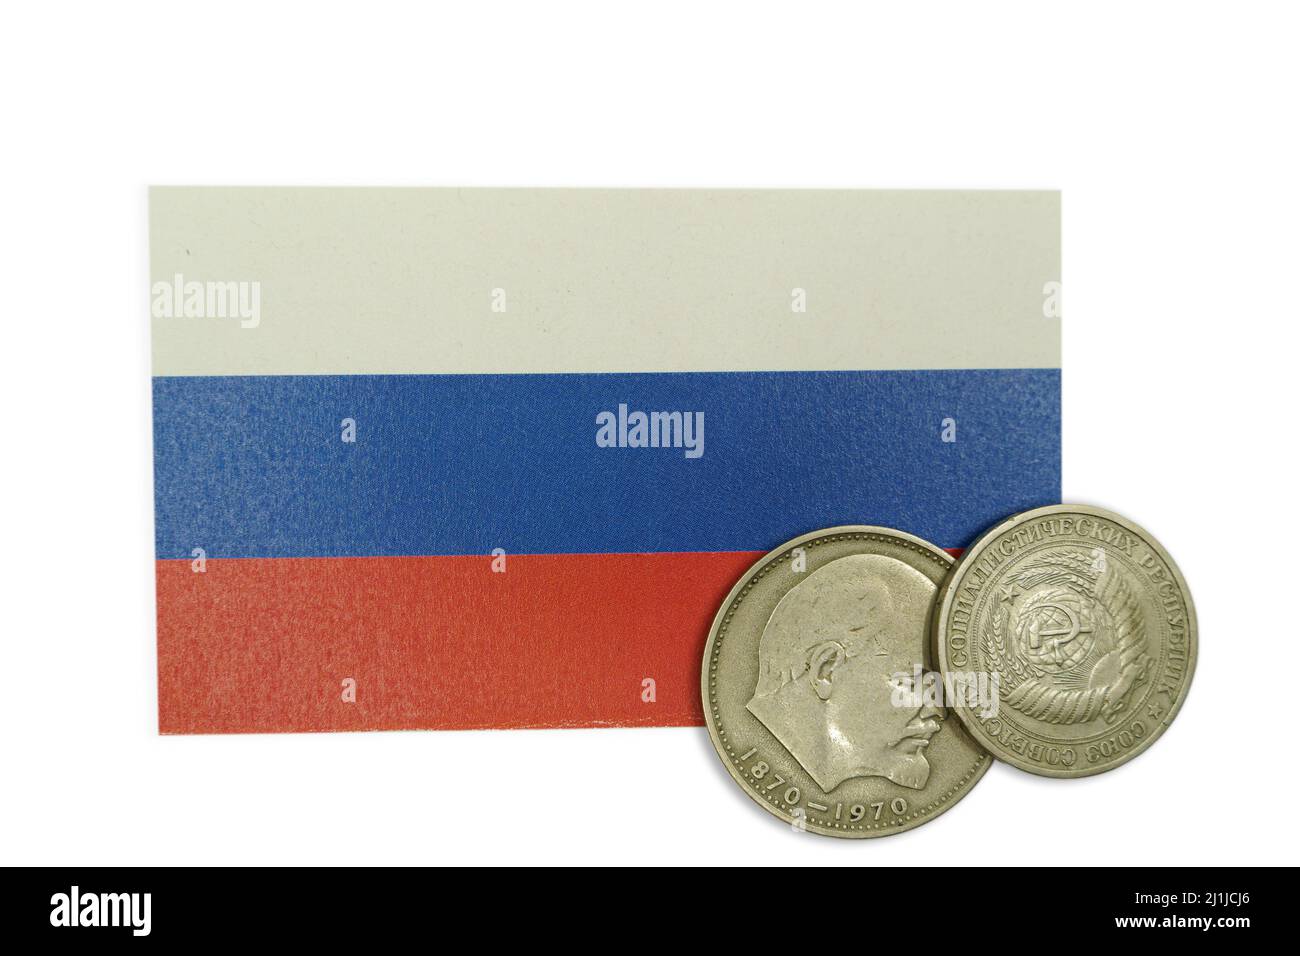 Commemorative USSR or CCCP 1 ruble Lenin coin over a Russian federation flag Stock Photo